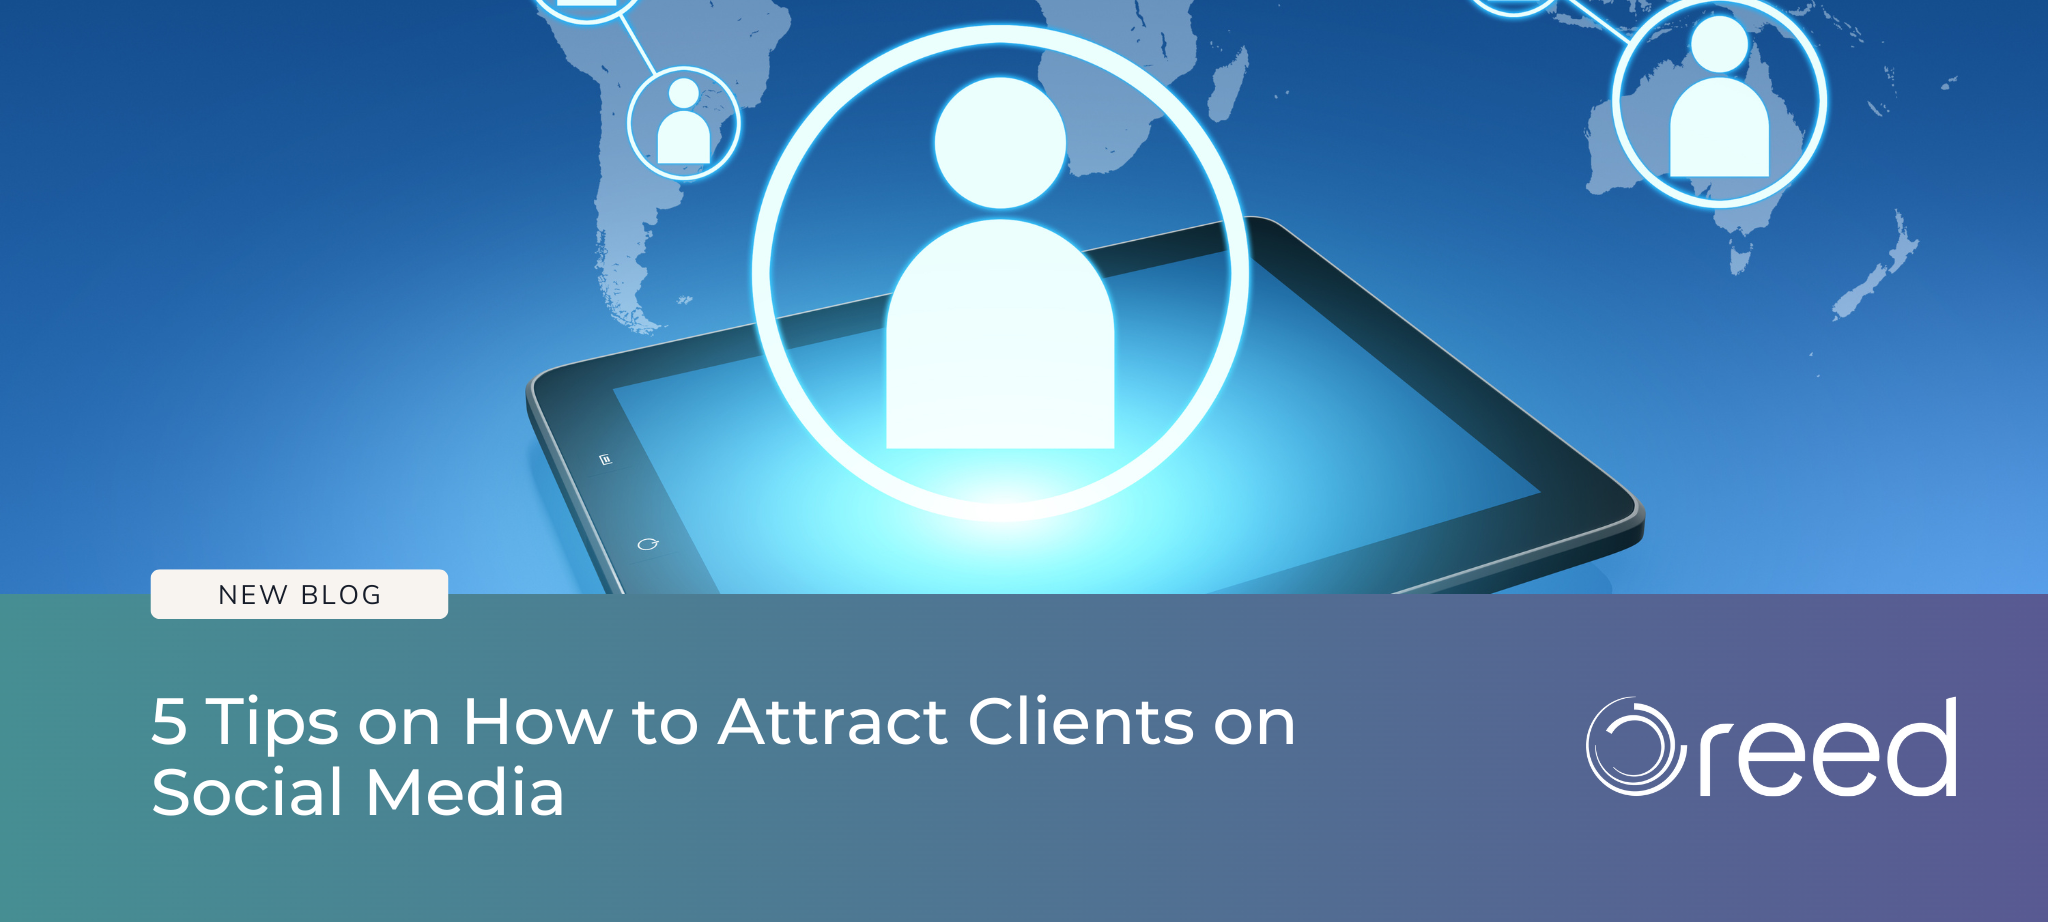 5 Tips on How to Attract Clients on Social Media